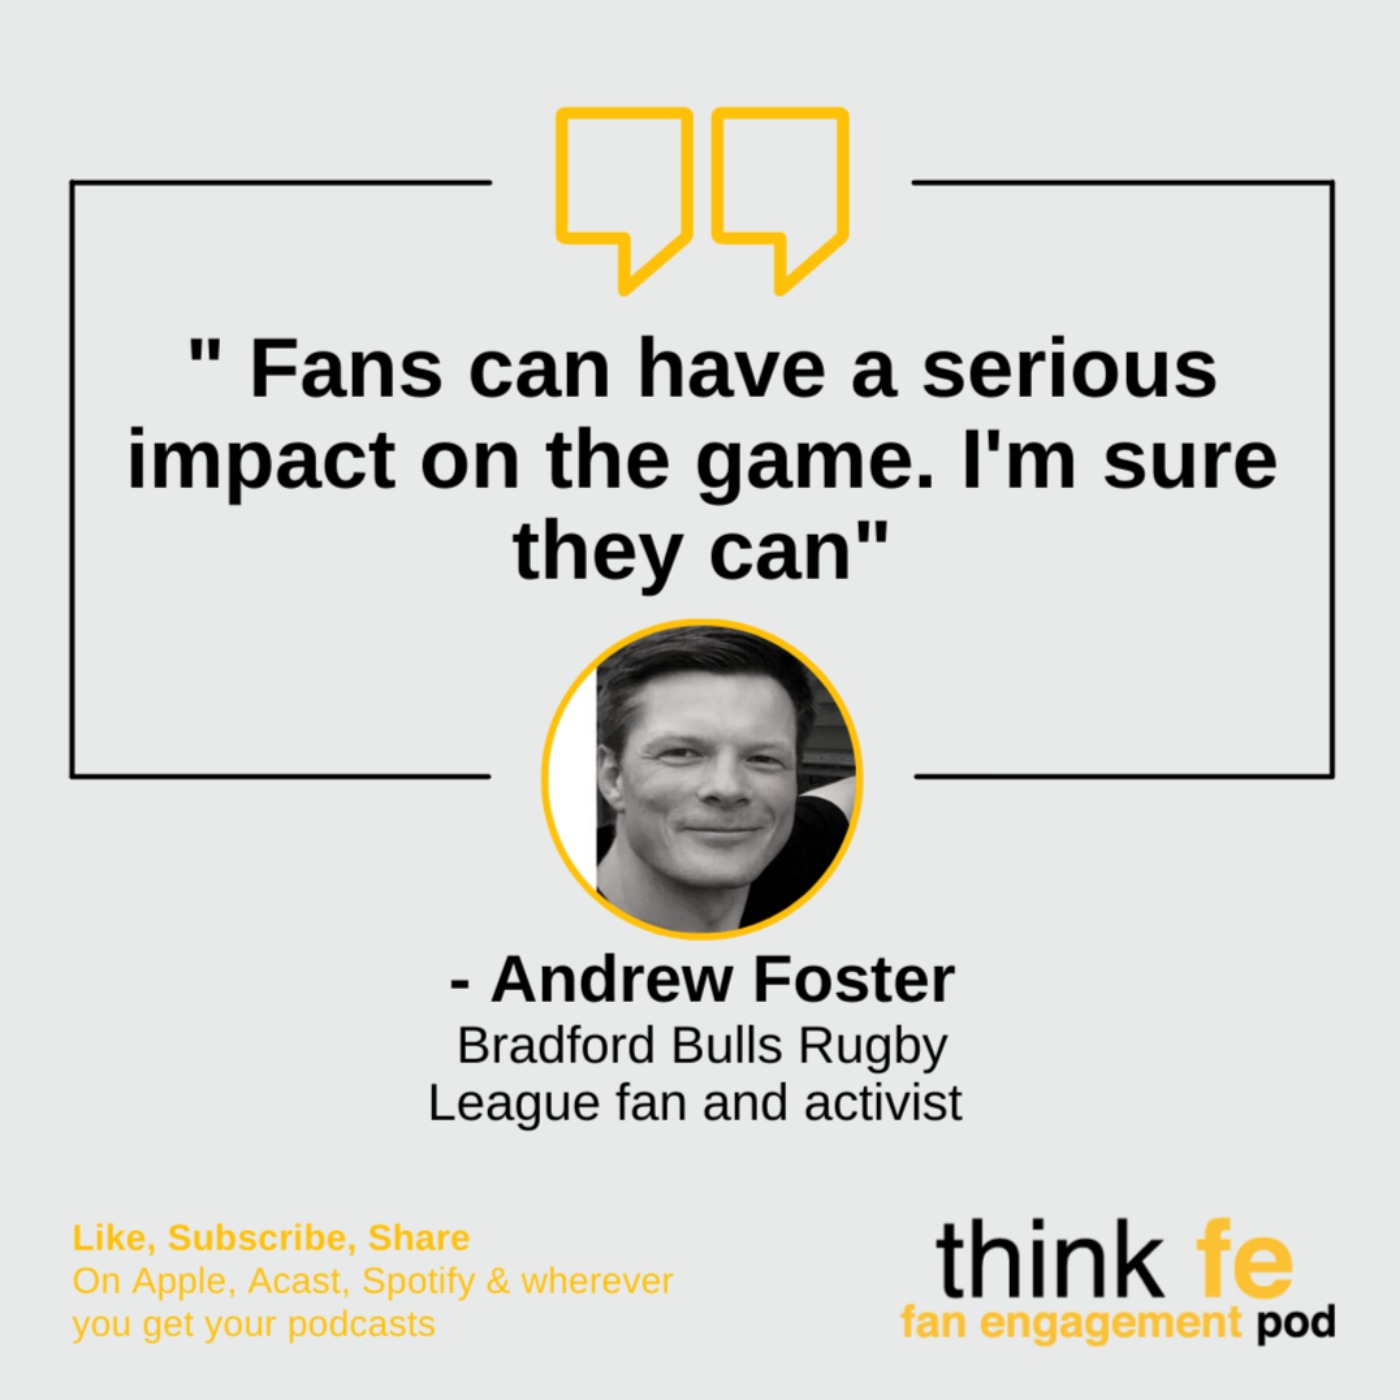 What role for activists in change? Andrew Foster, activist & Bradford Bulls fan